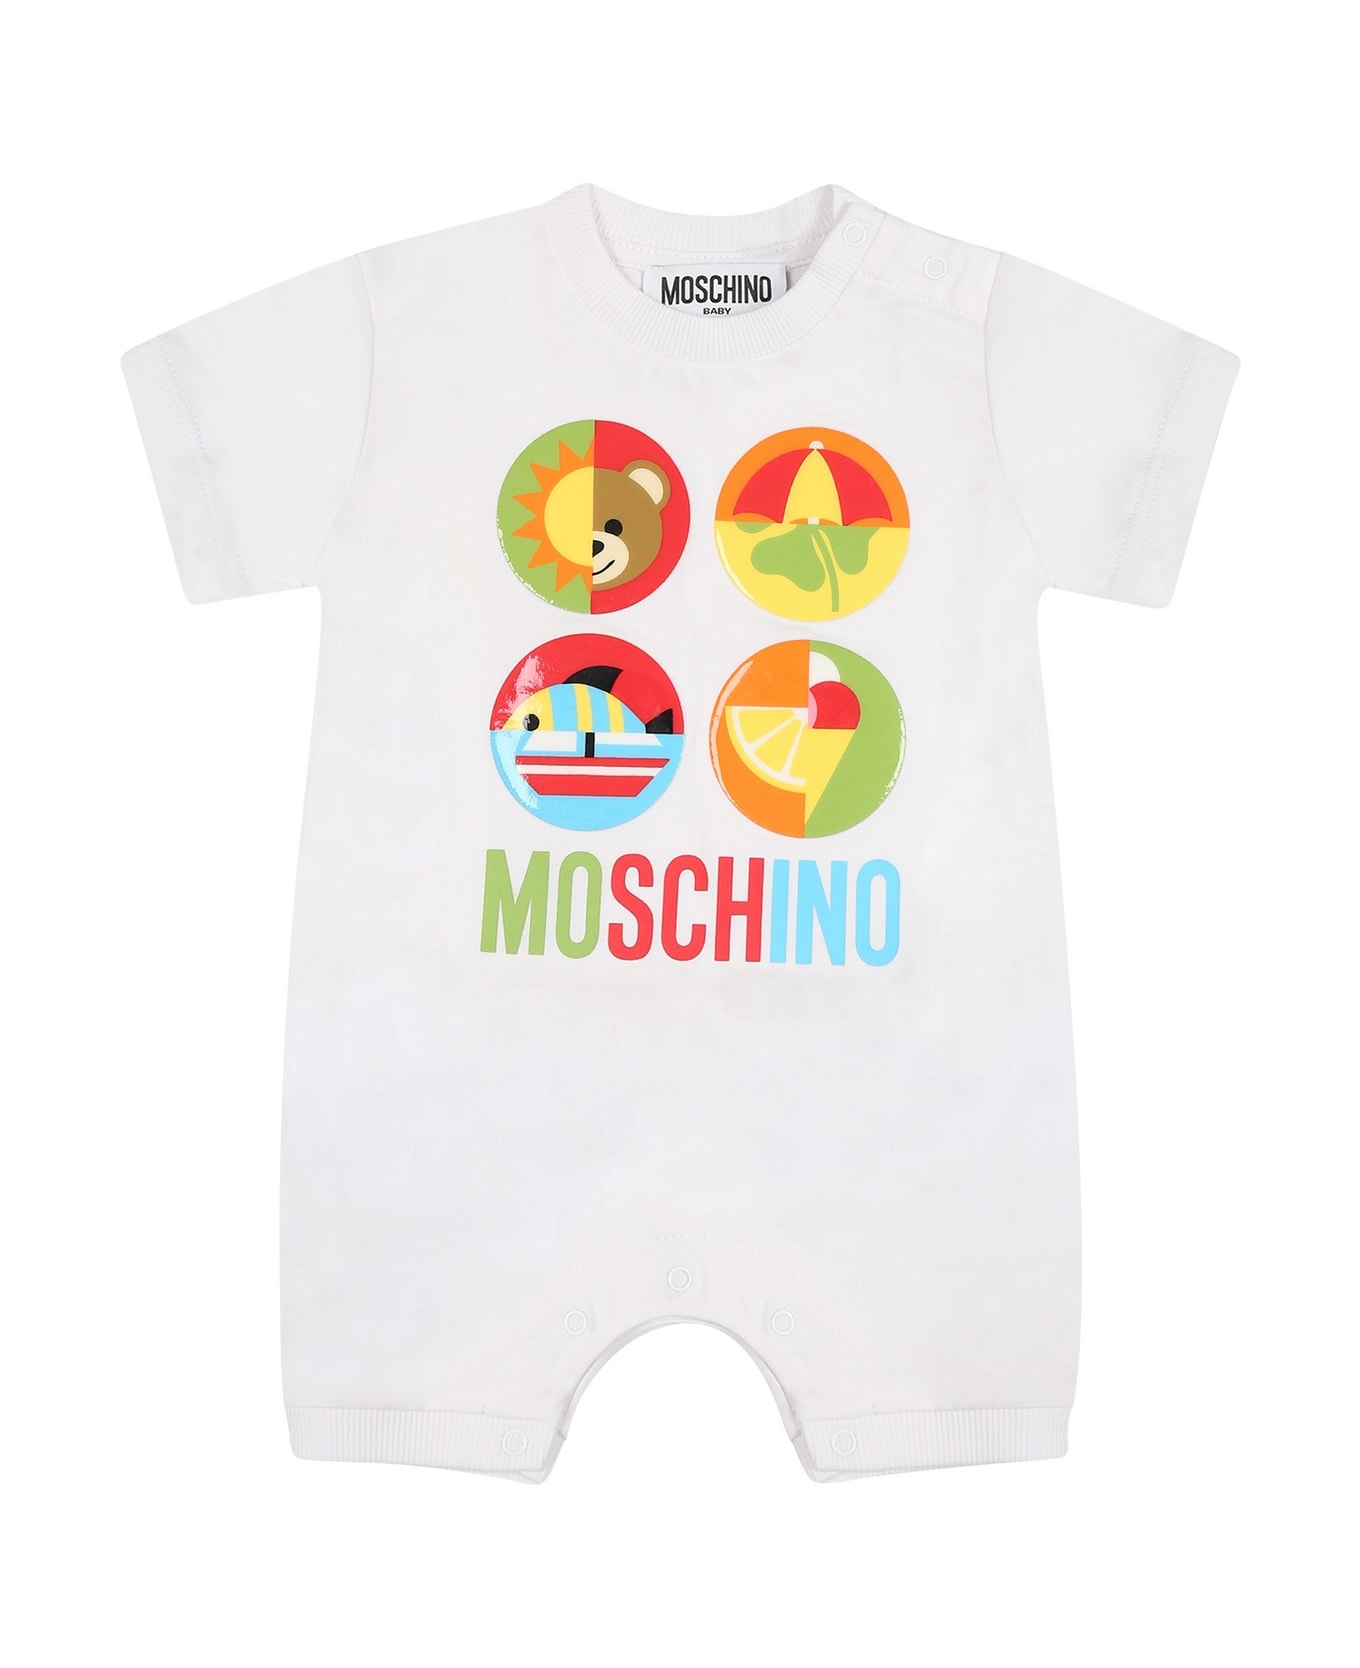 Moschino White Romper For Bbay Kids With Logo And Print - White